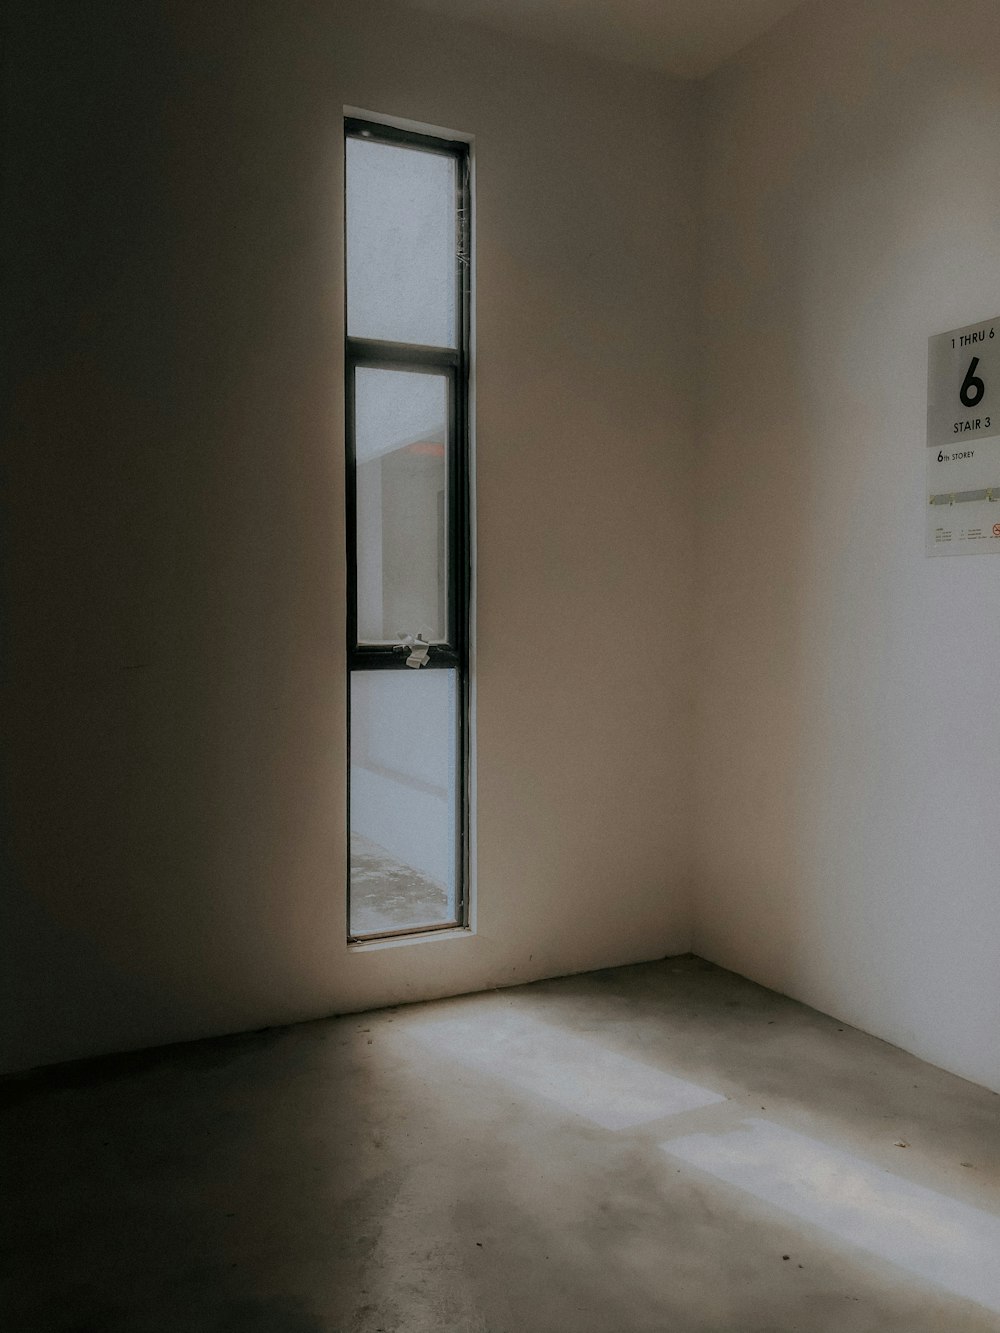 an empty room with a window and a sign on the wall